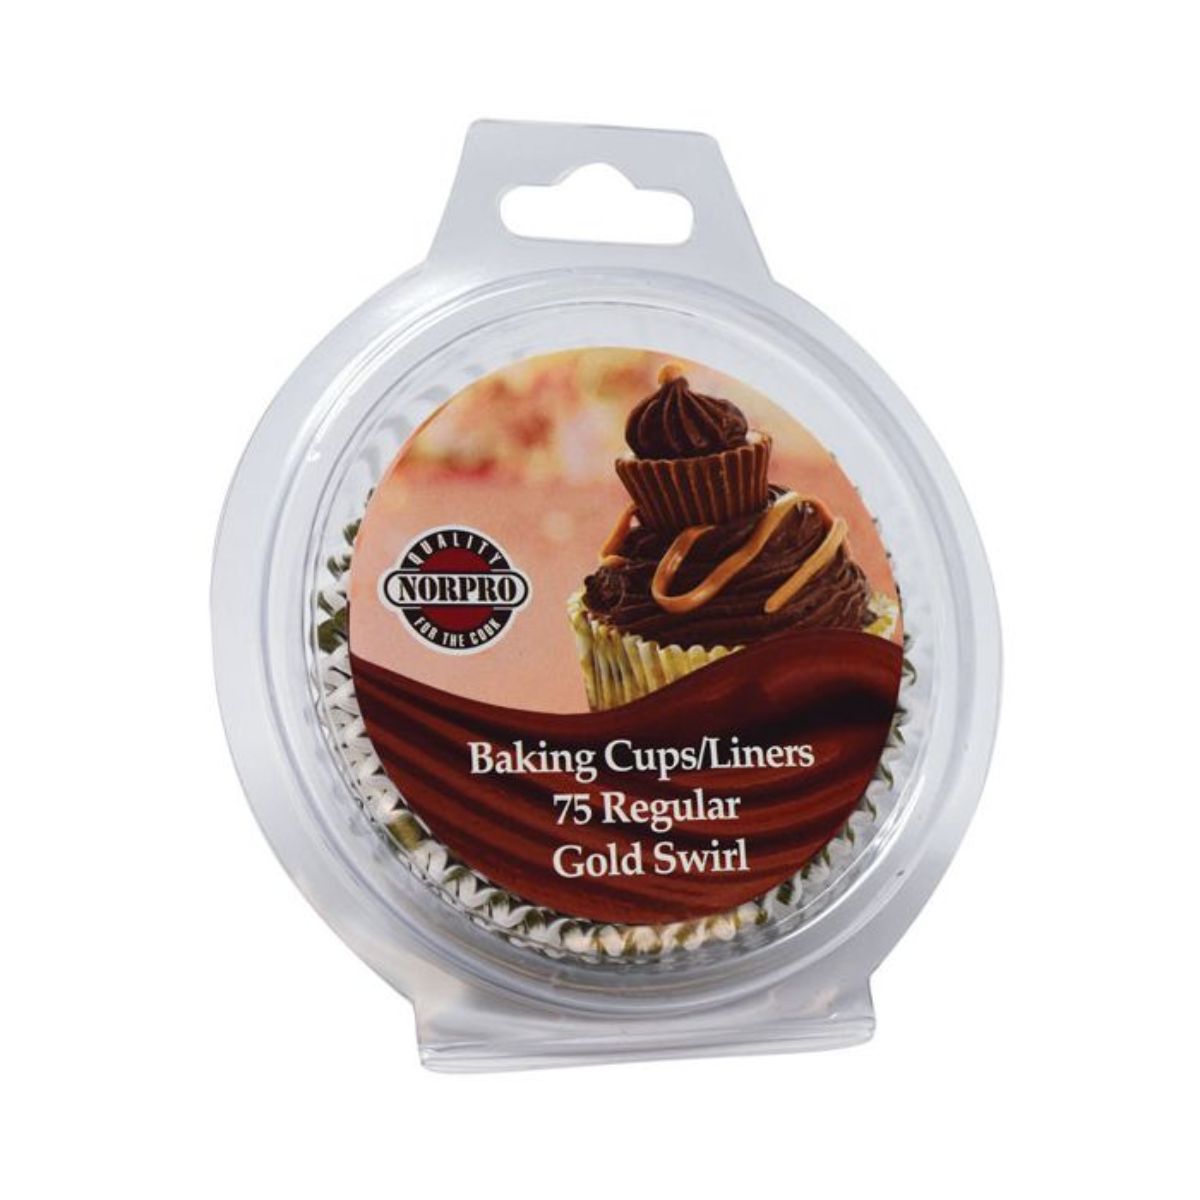 Norpro Standard Size Gold Swirl Baking Cups/Liners 75ct